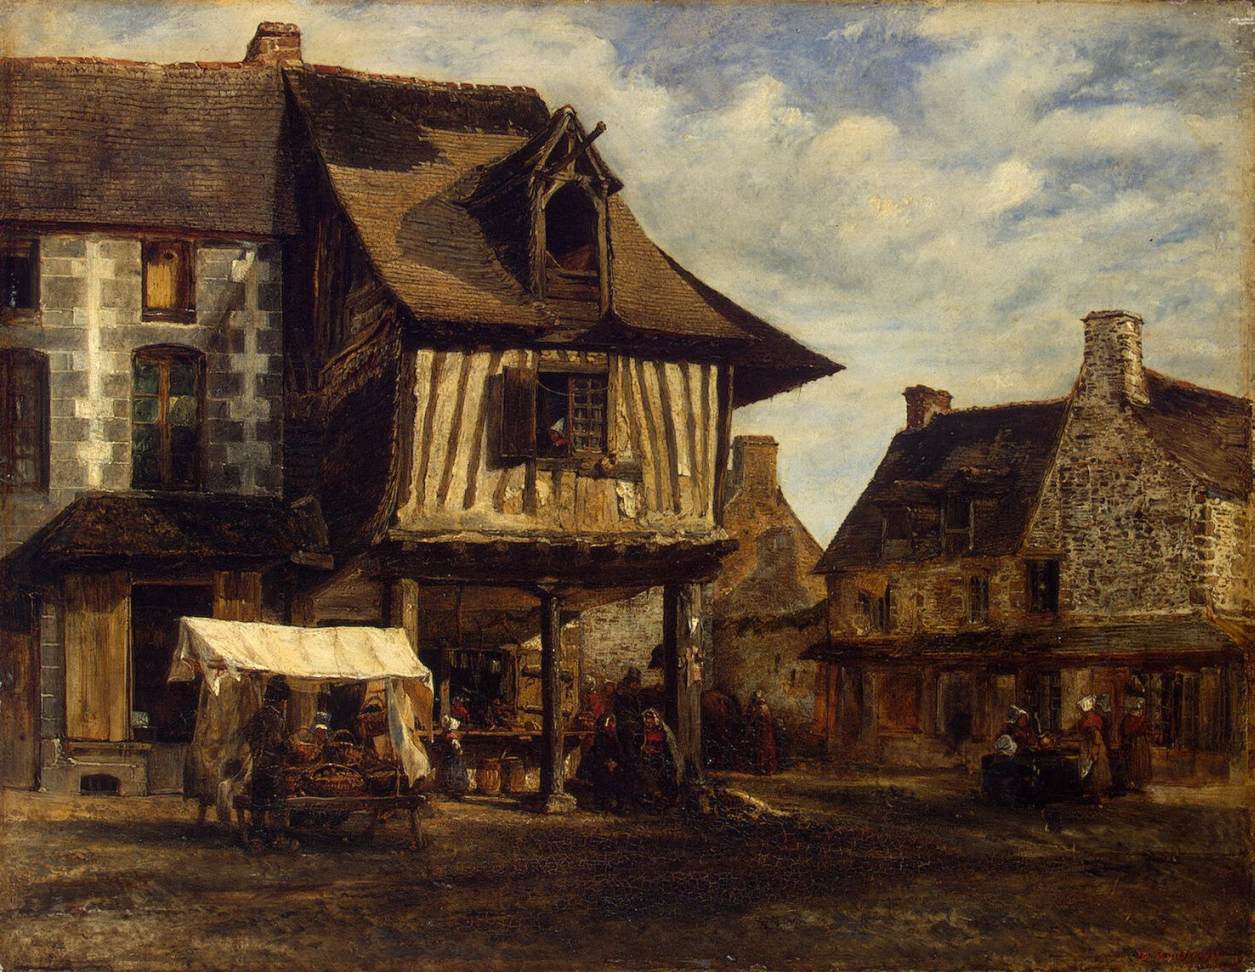 images/Market-Place_in_Normandy.jpg